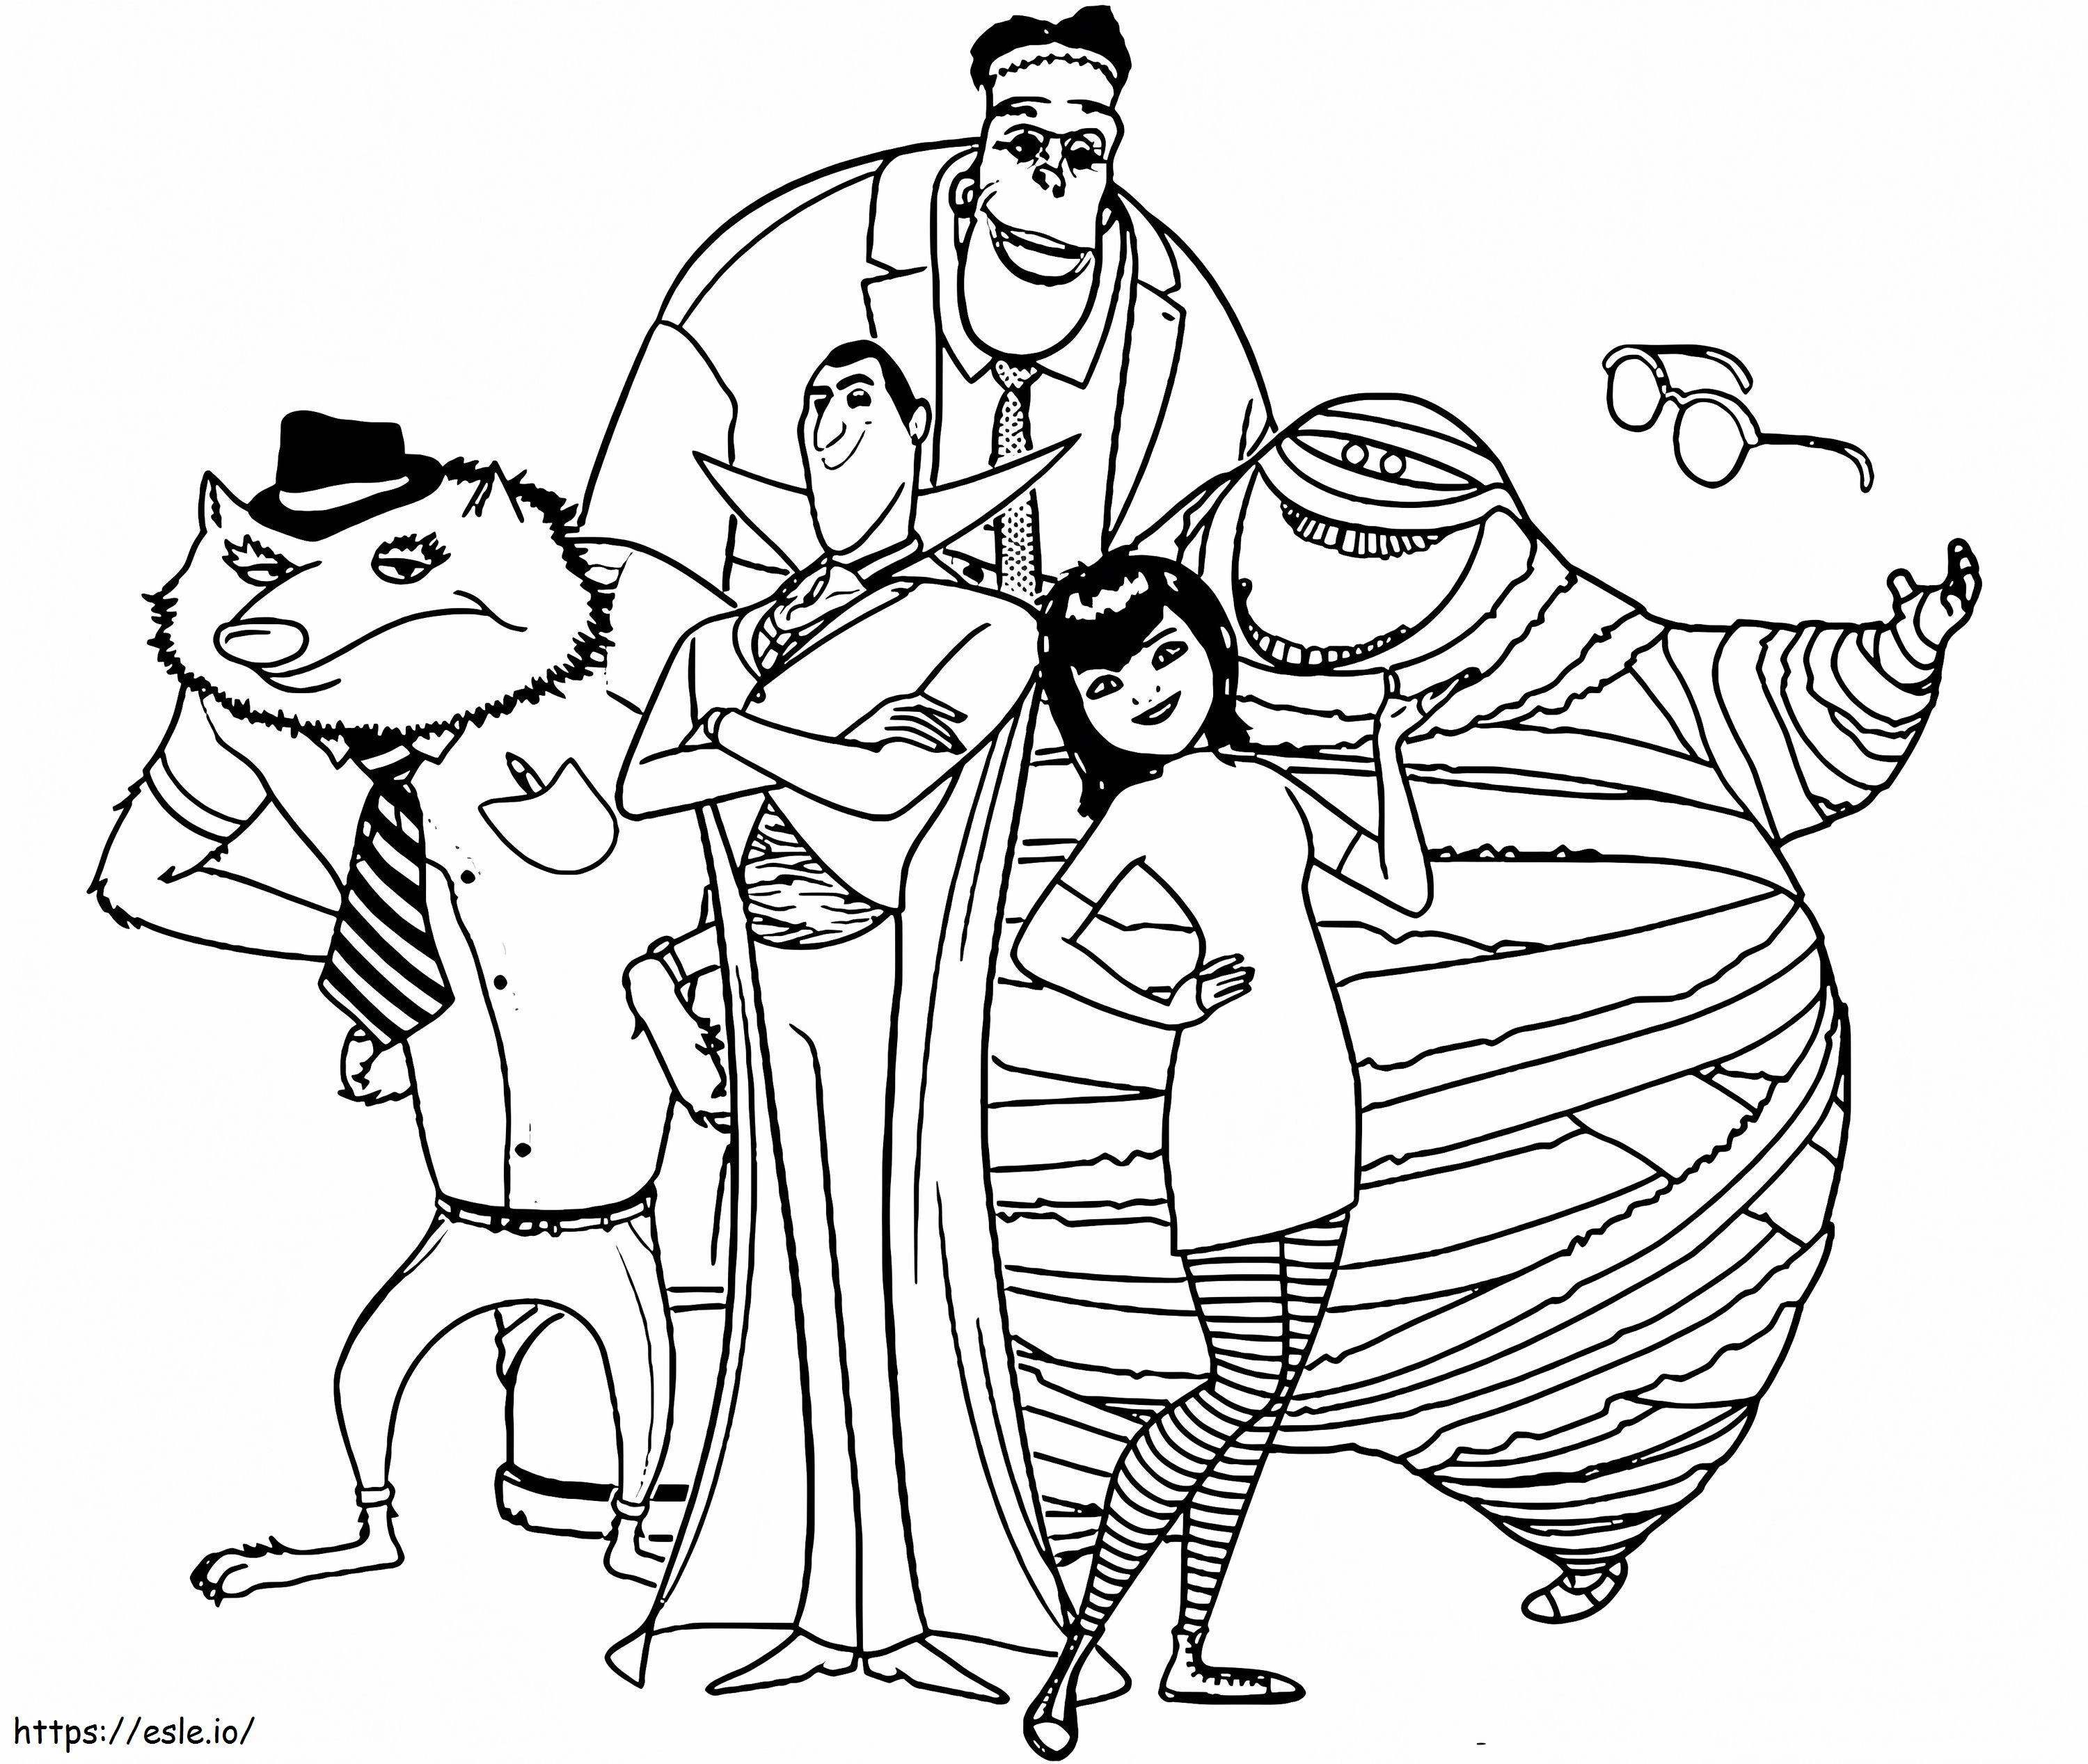 Hotel Transylvania Characters coloring page